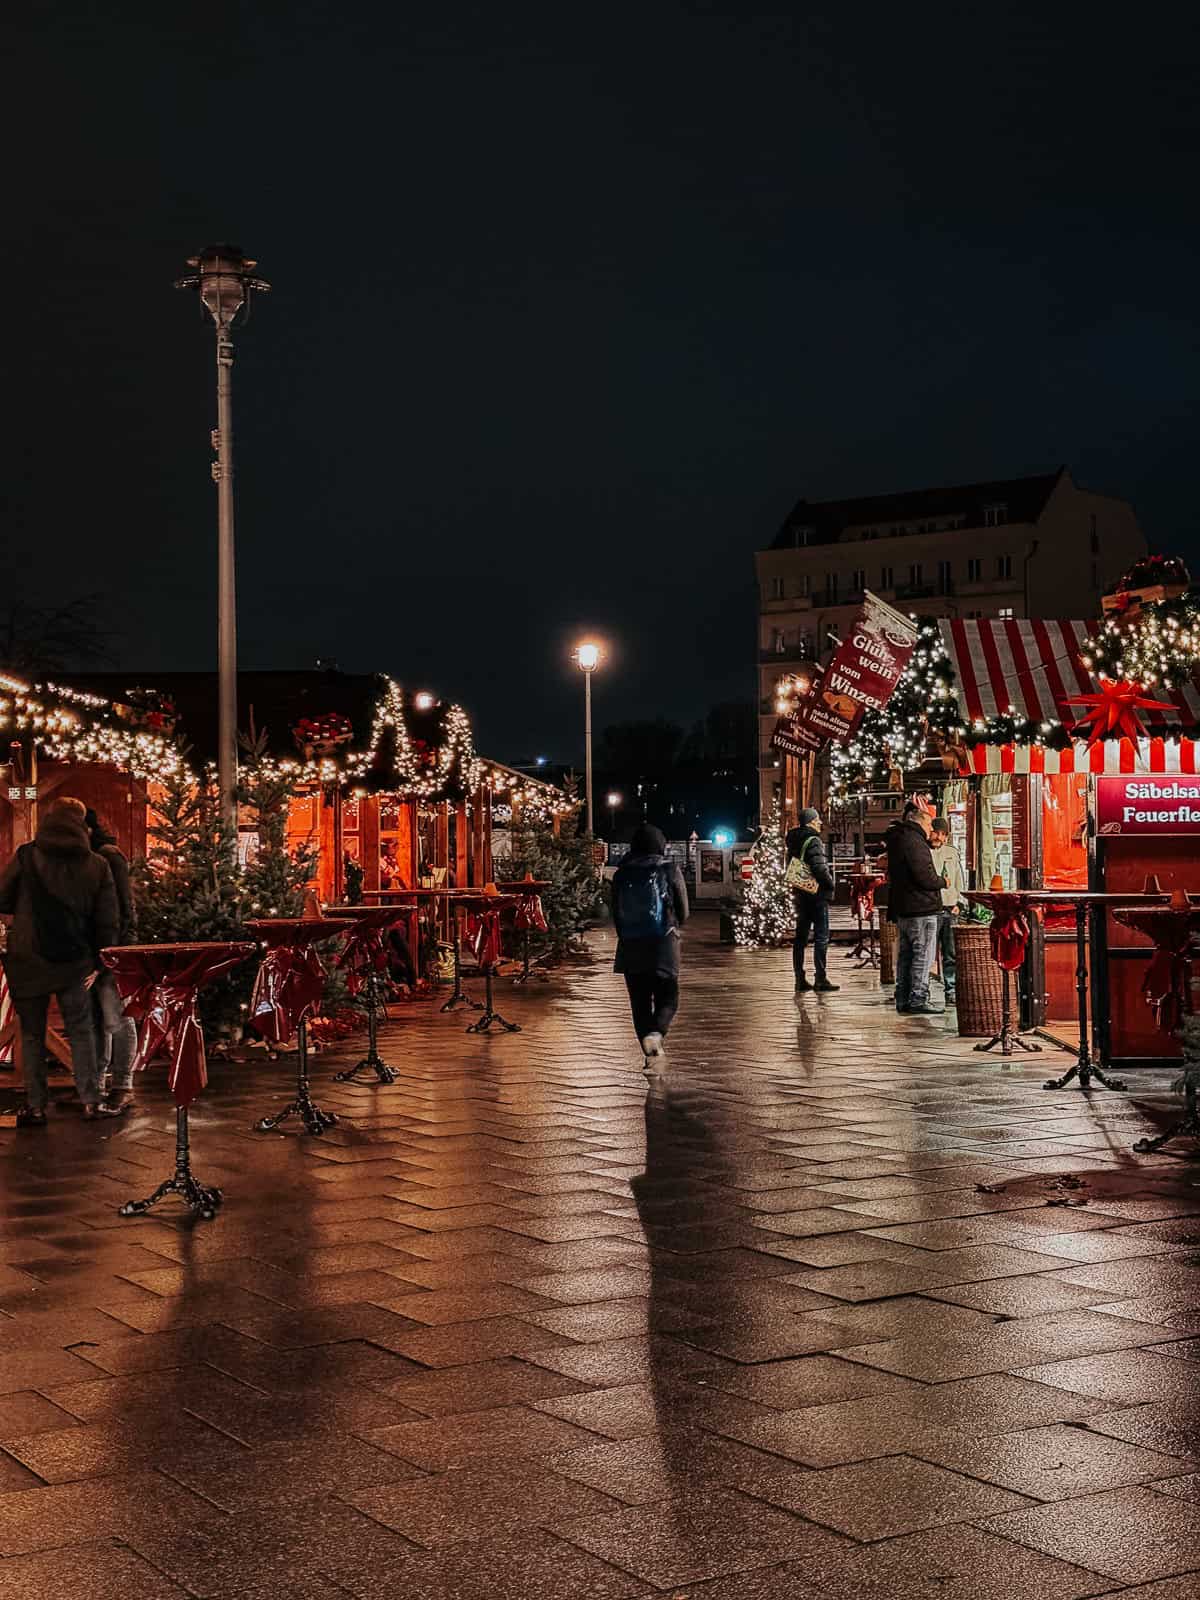 A well-lit pedestrian street adorned with festive decorations and Christmas lights. The scene shows empty café tables and people strolling along the pavement, contributing to a serene yet festive urban environment